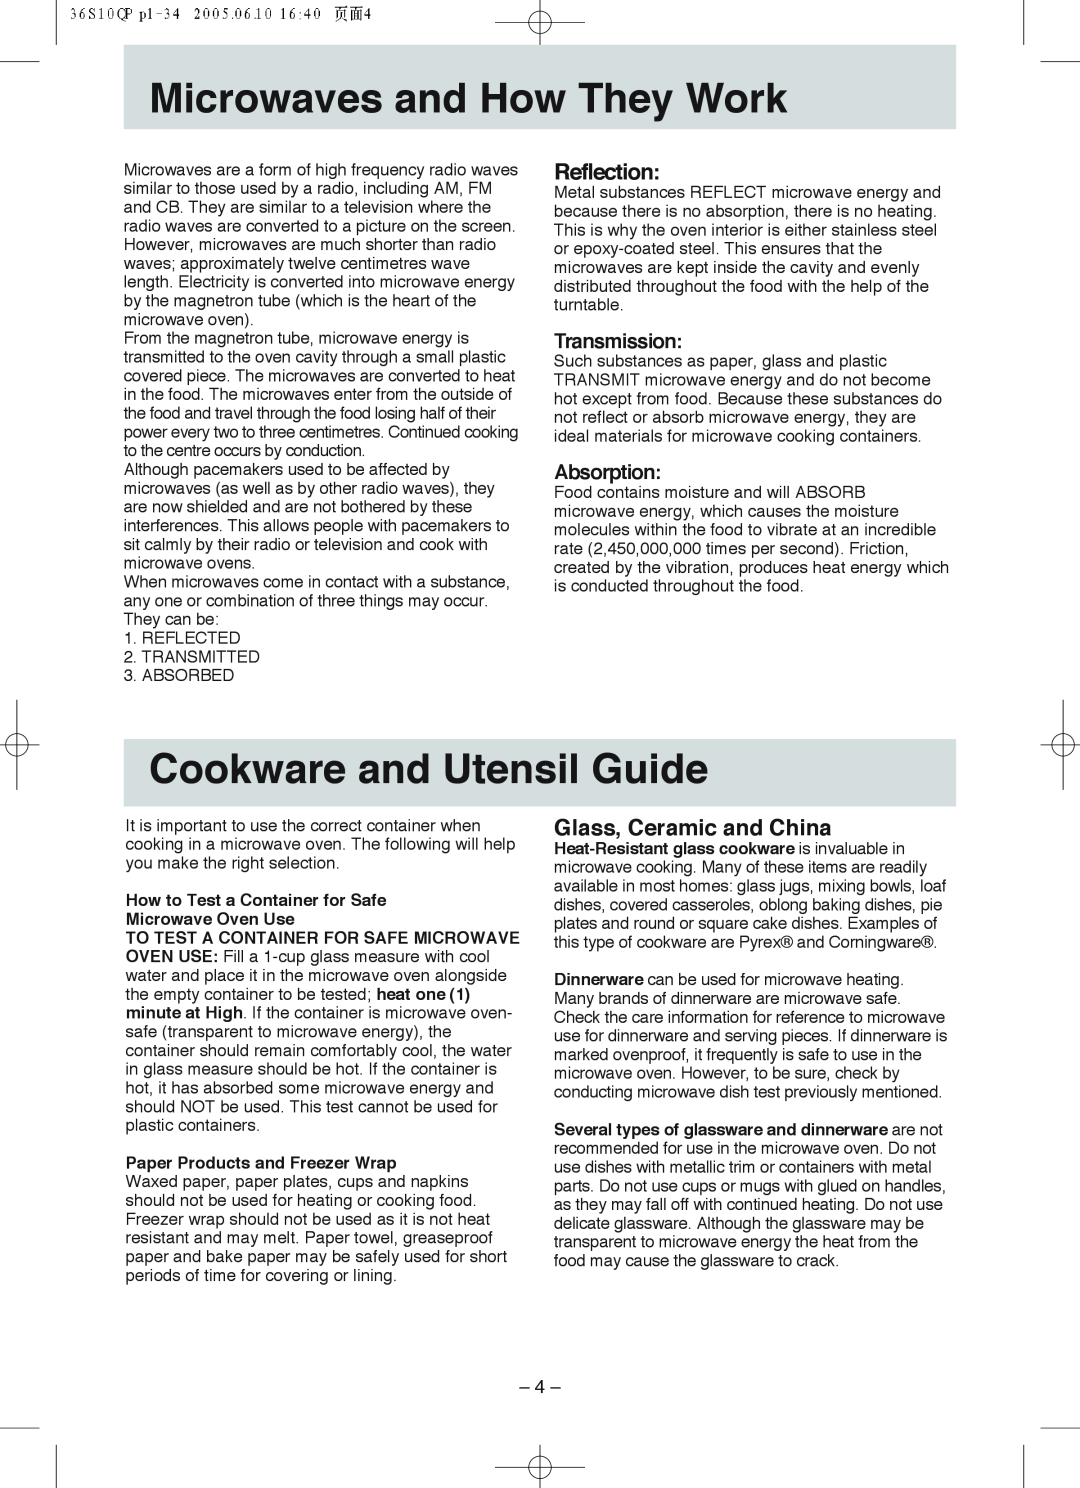 Panasonic NN-S215, NN-S235 Microwaves and How They Work, Cookware and Utensil Guide, Reflection, Glass, Ceramic and China 